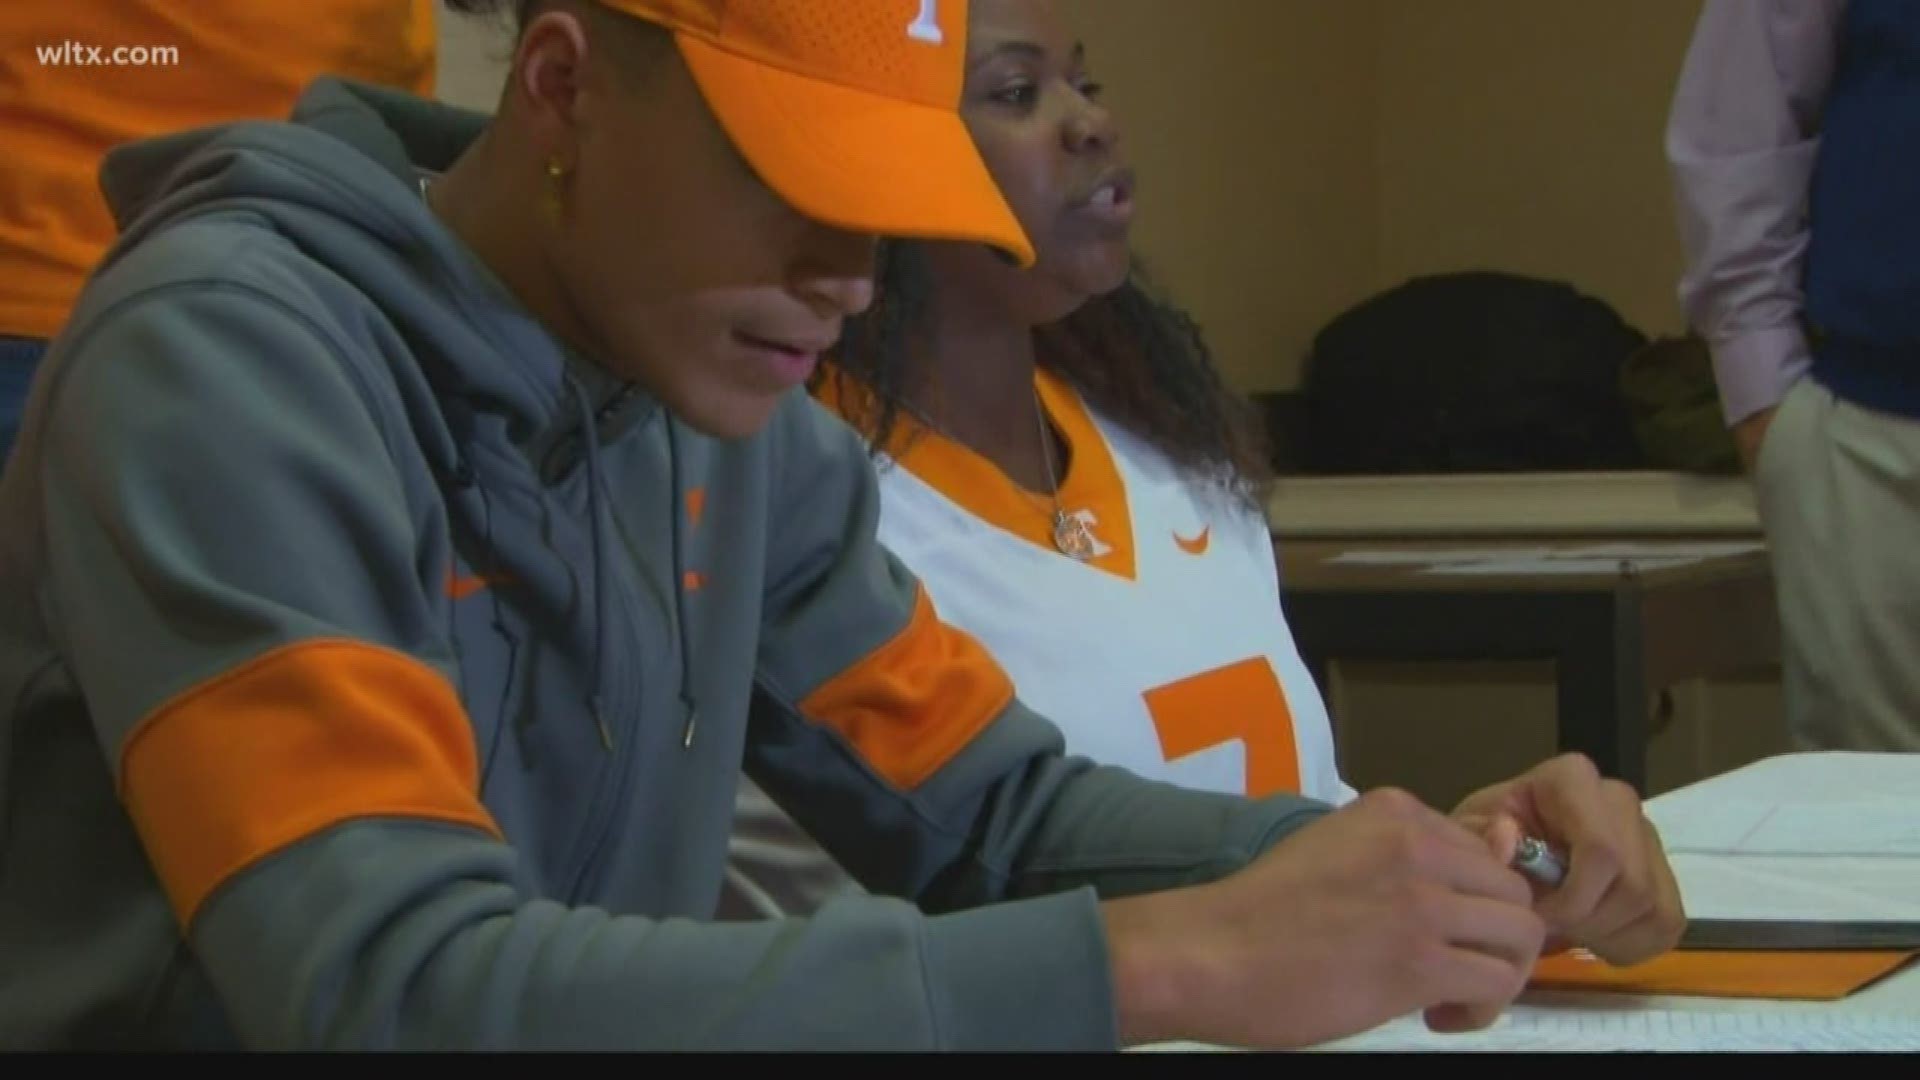 On the first day of this three-day early signing period for football, Jalin Hyatt puts pen to paper and joins Jeremy Pruitt's third recruiting class